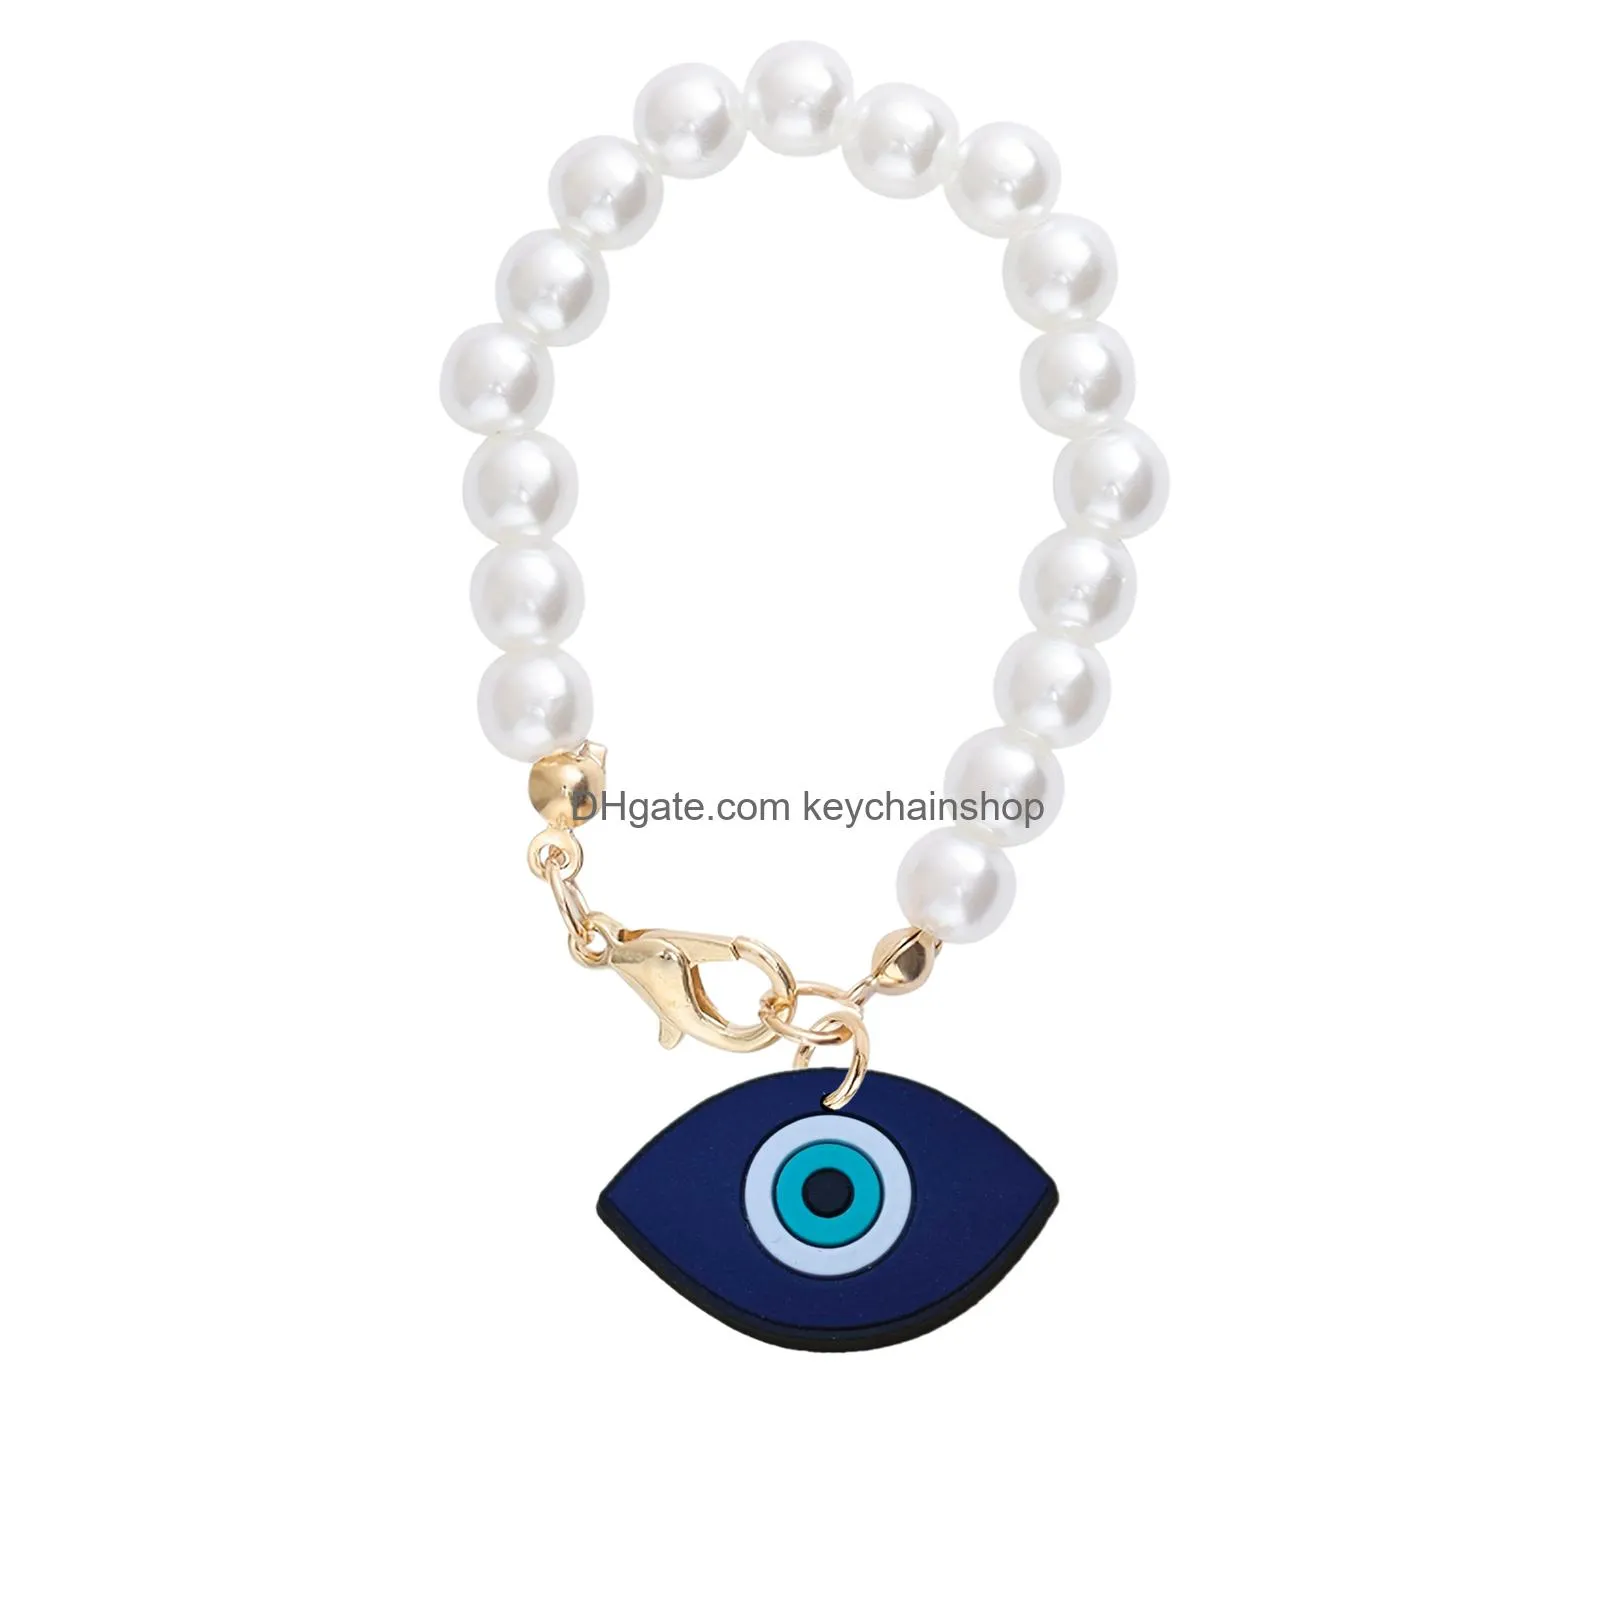 evil eye charm accessories cup for 40oz cup simple modern tumbler with handle sile key chain